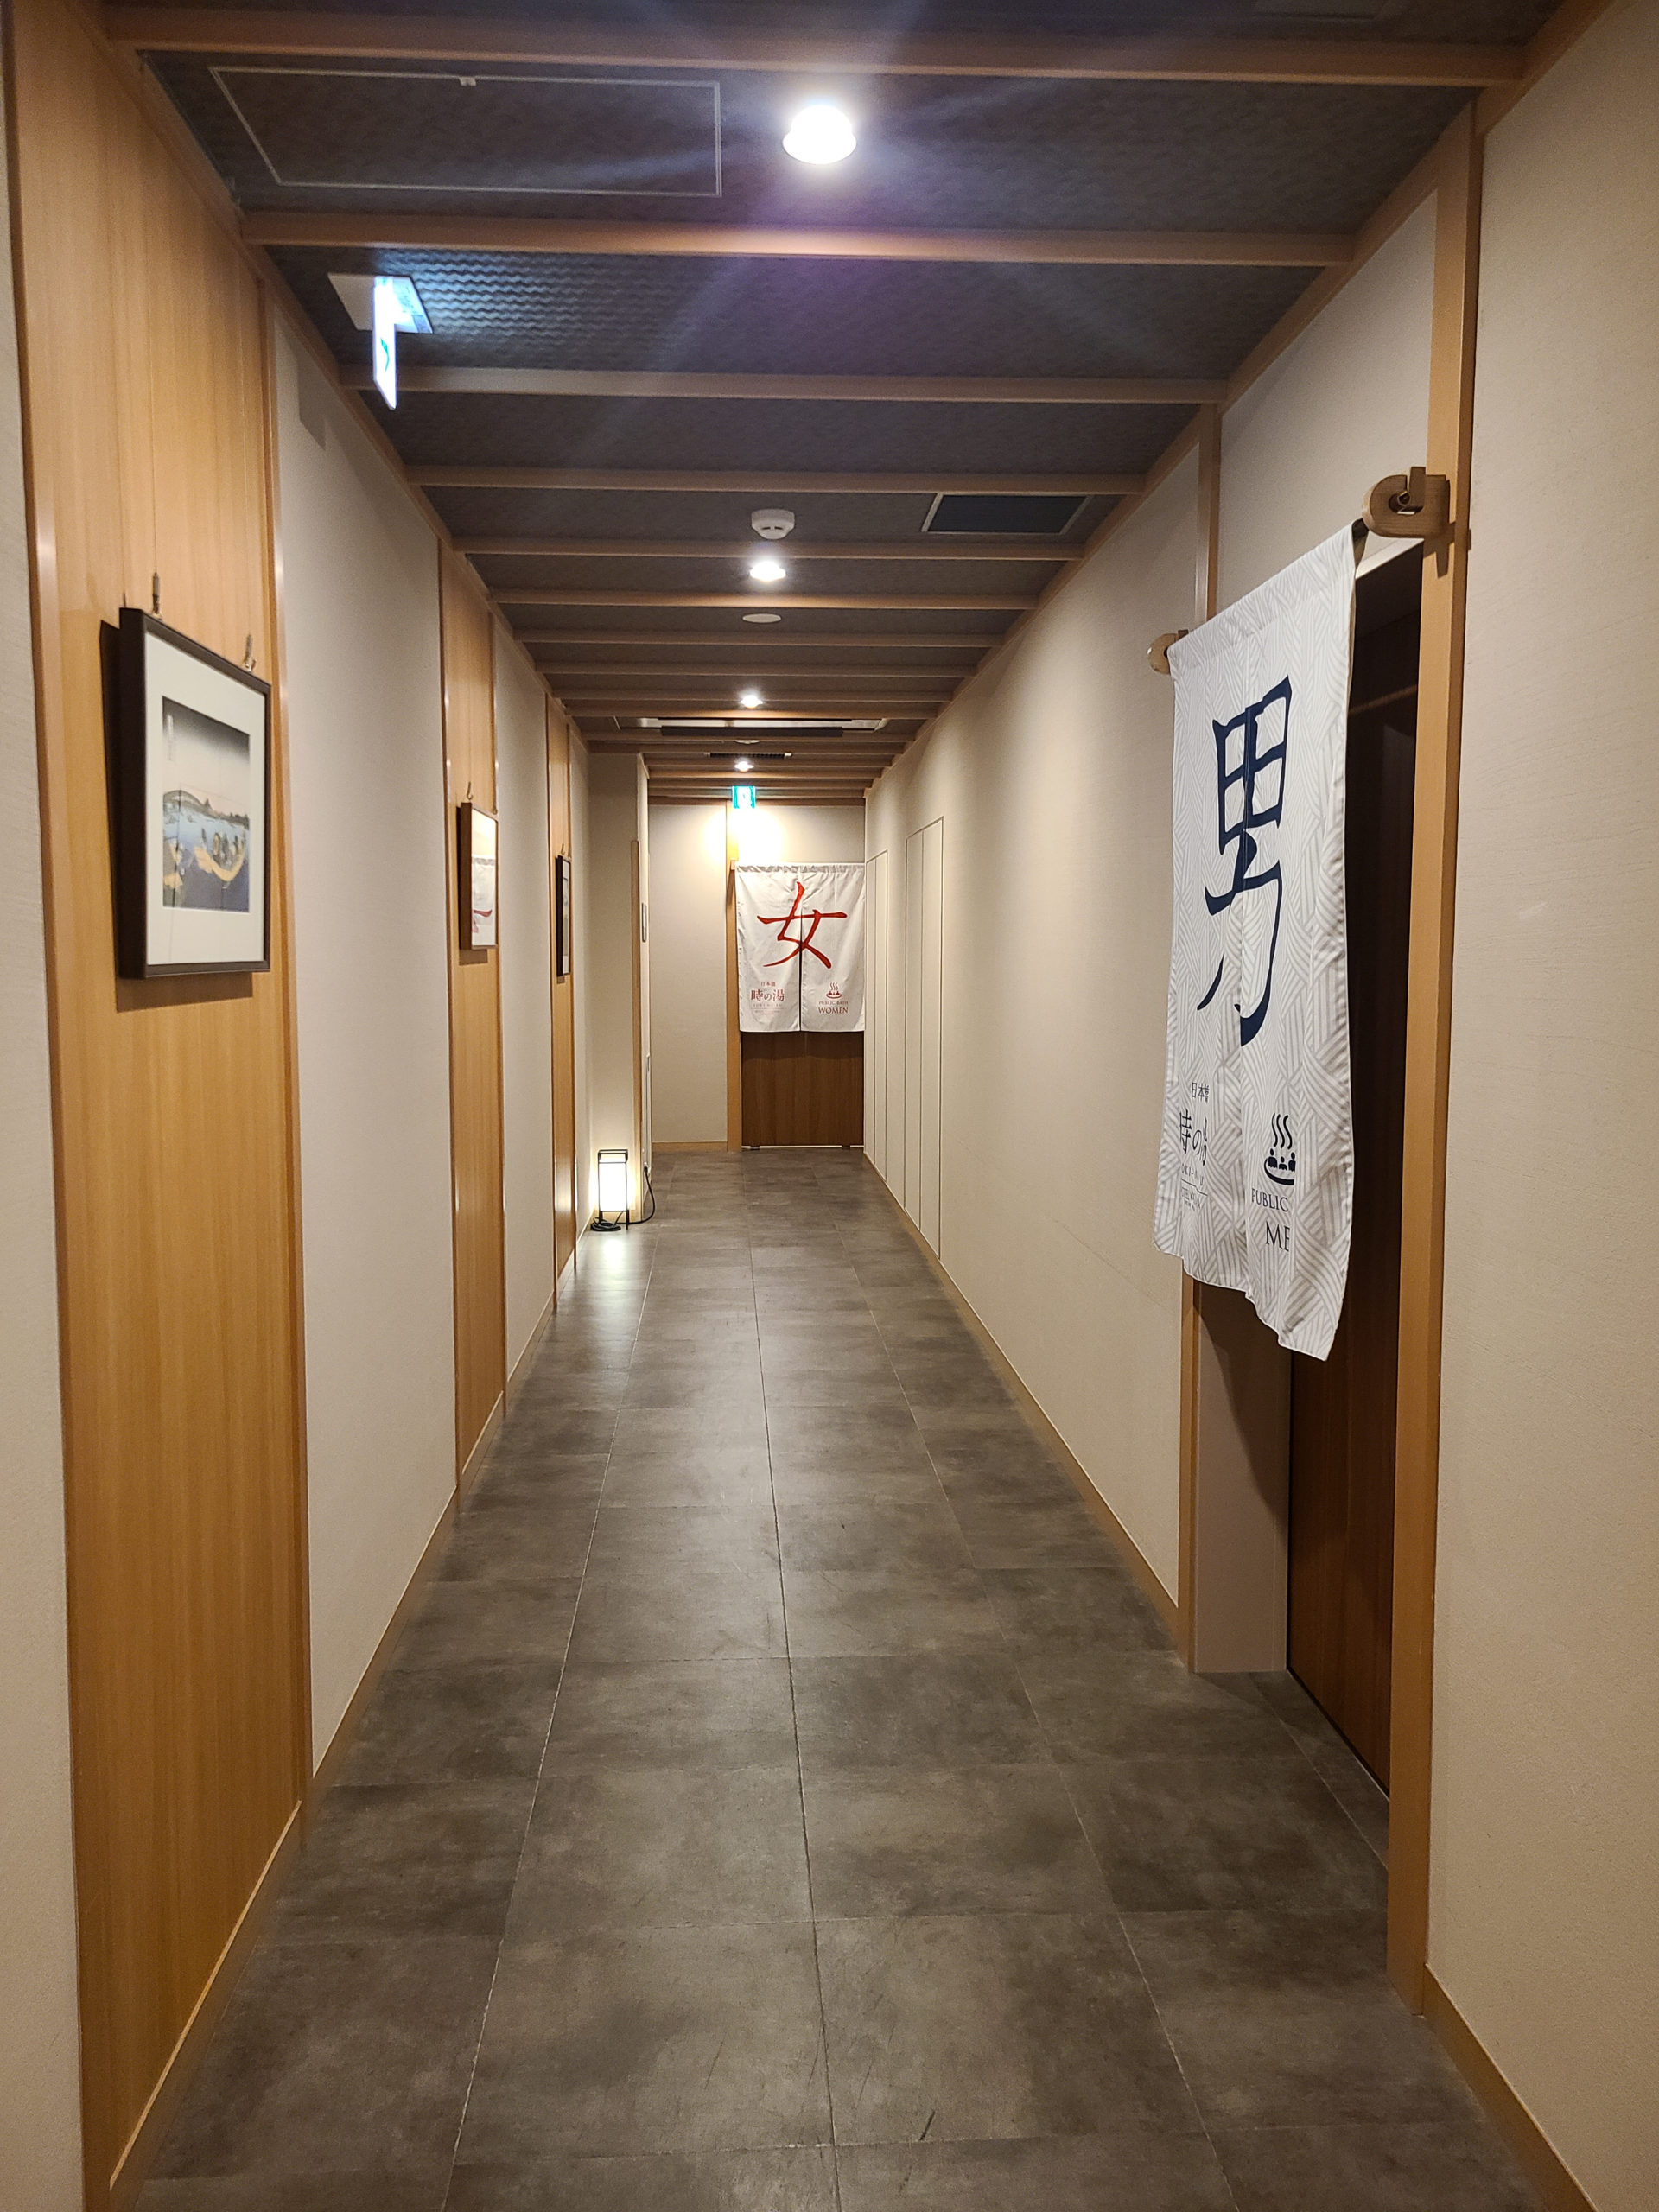 The automatic door featuring traditional Japanese woodwork leads to the public bath hallway 